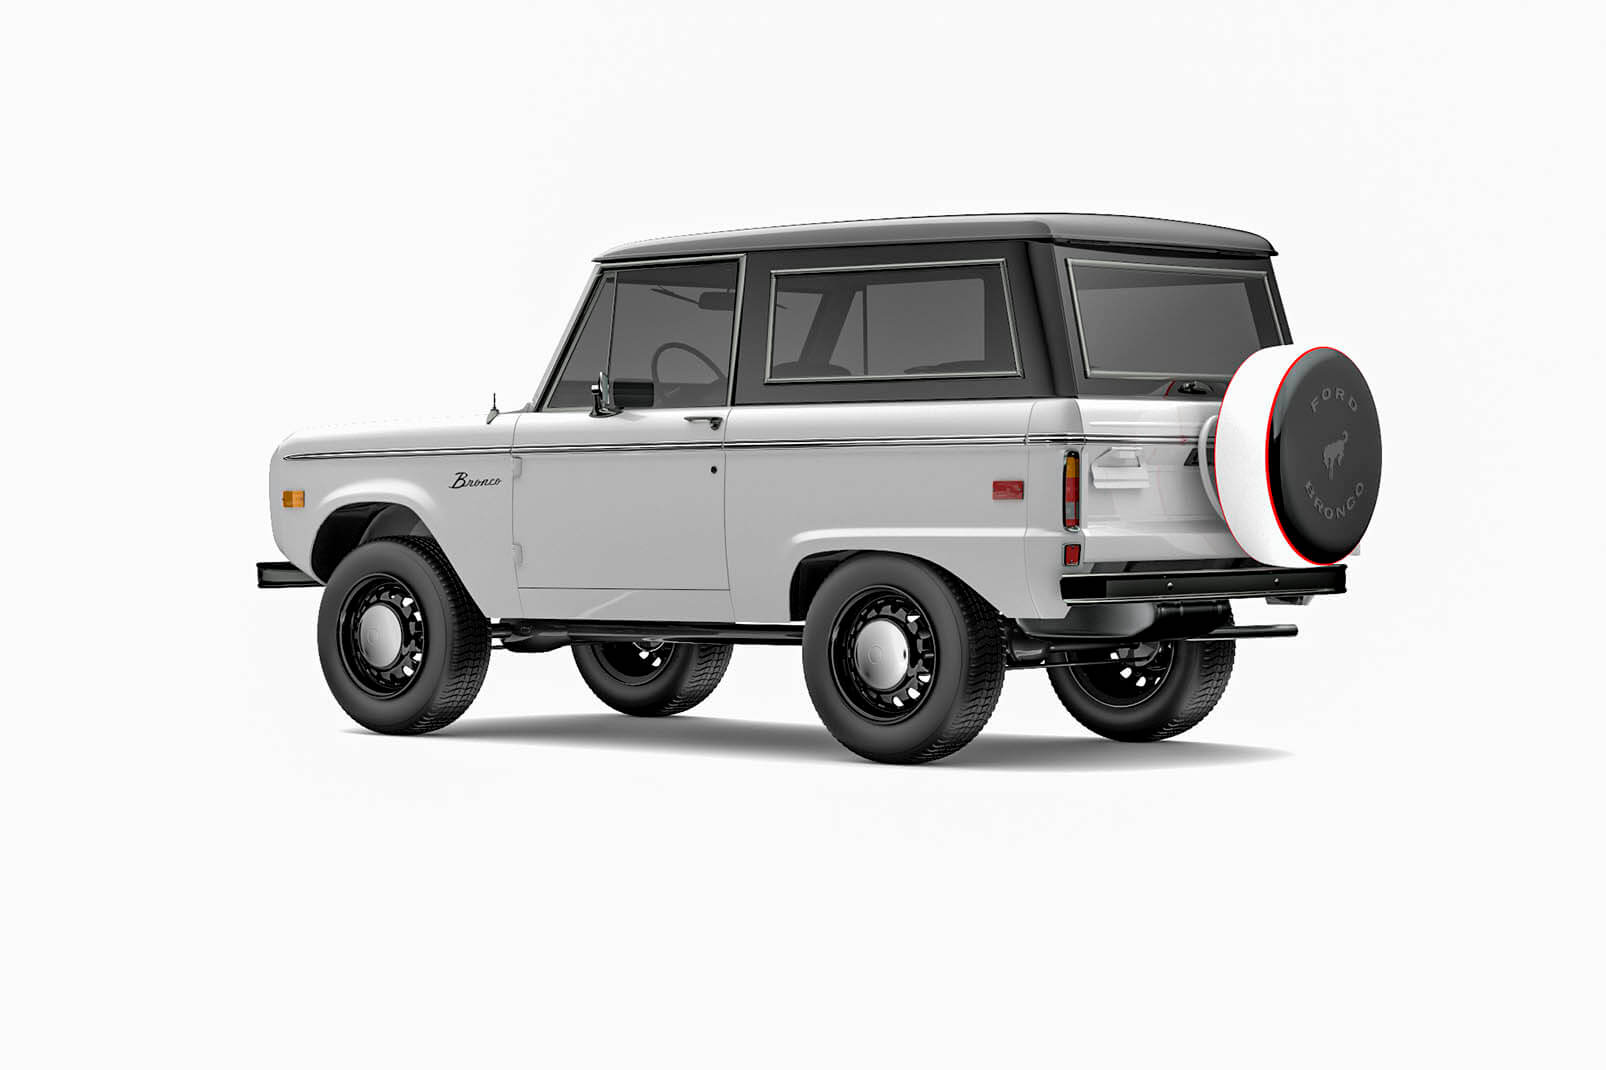 CGI Visualization Ford Bronco MK1 - Restomod by Studio Powers - An independent CGI Studio Based in Singapore Specializing In Product Visualization.